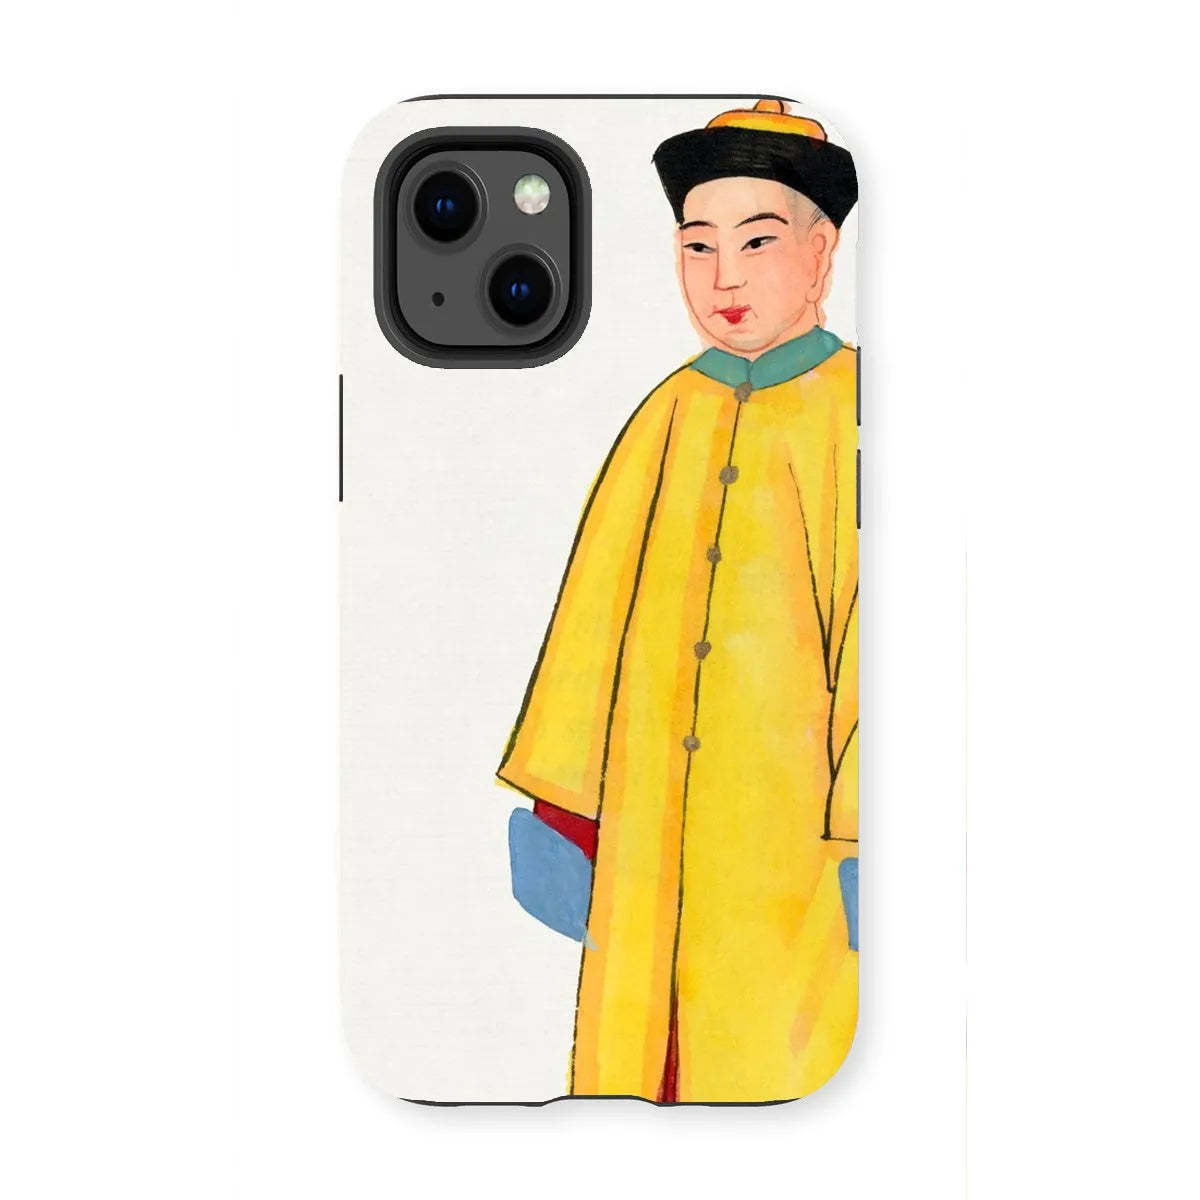 Priest In Yellow Robes - Chinese Aesthetic Art Phone Case - Iphone 13 Mini / Matte - Mobile Phone Cases - Aesthetic Art